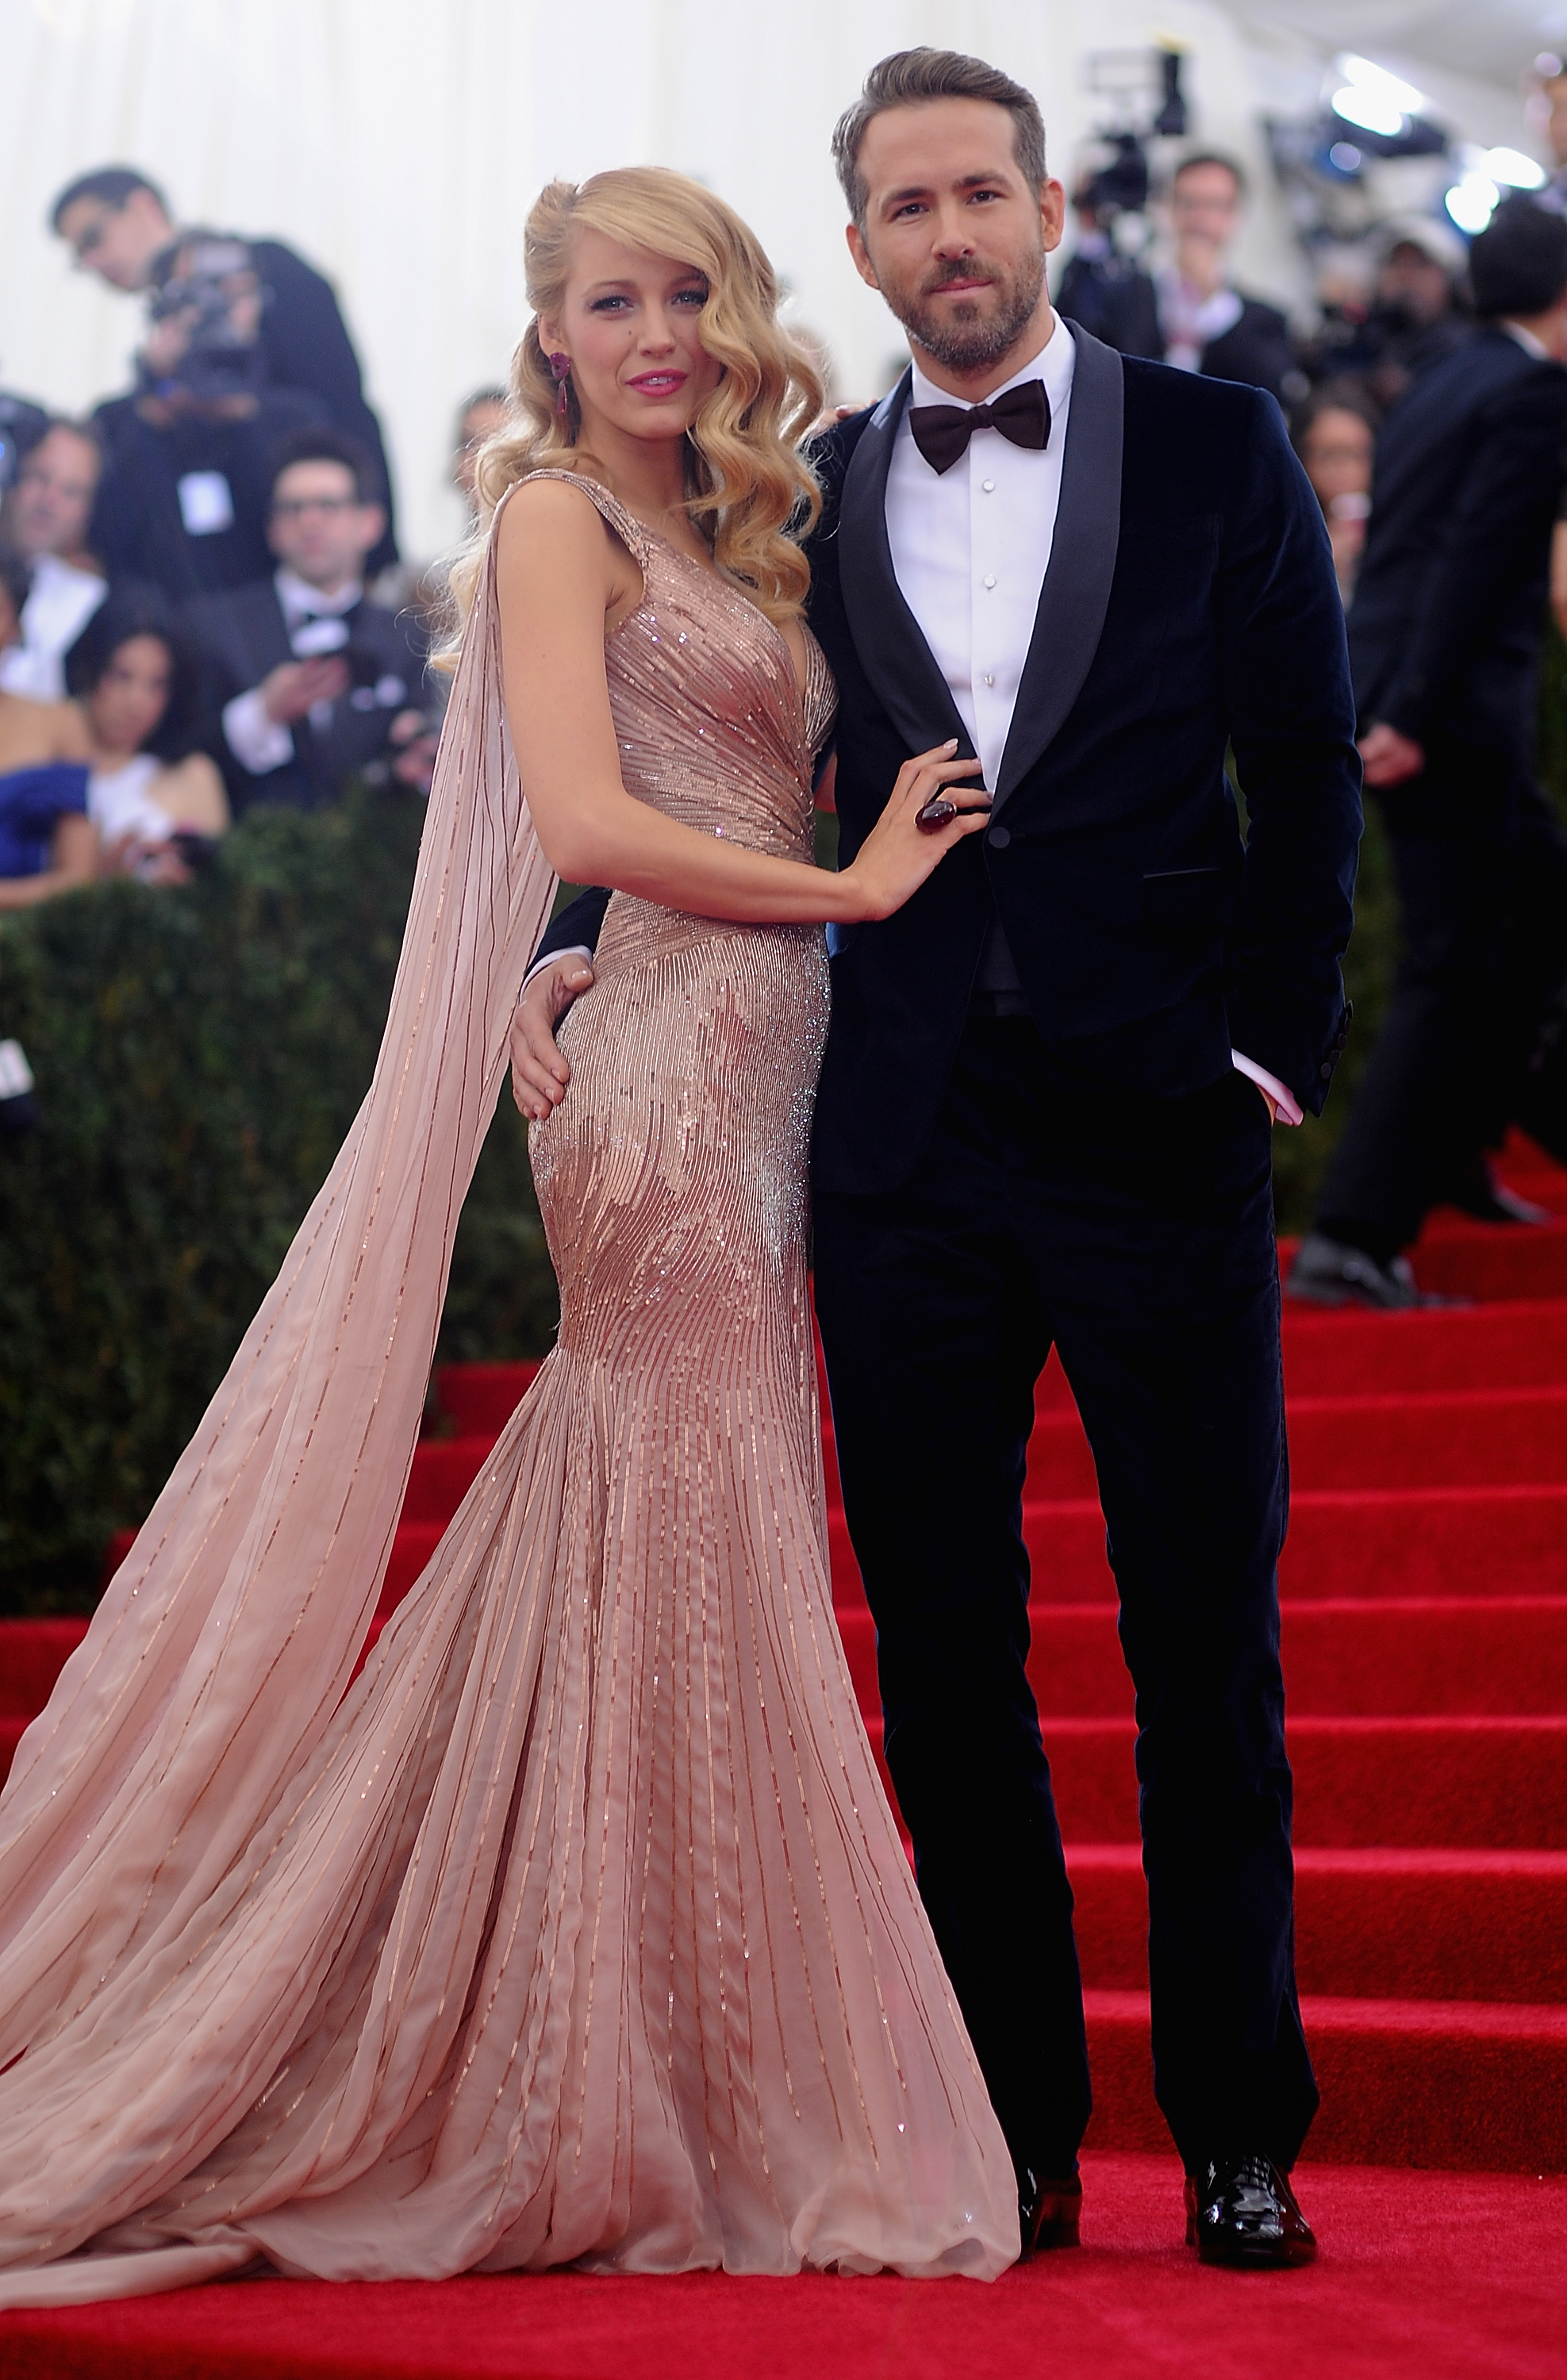 Blake Lively and Ryan Reynolds attend the "Charles James: Beyond Fashion" Costume Institute Gala at the Metropolitan Museum of Art, on May 5, 2014, in New York City.| Source: Getty Images